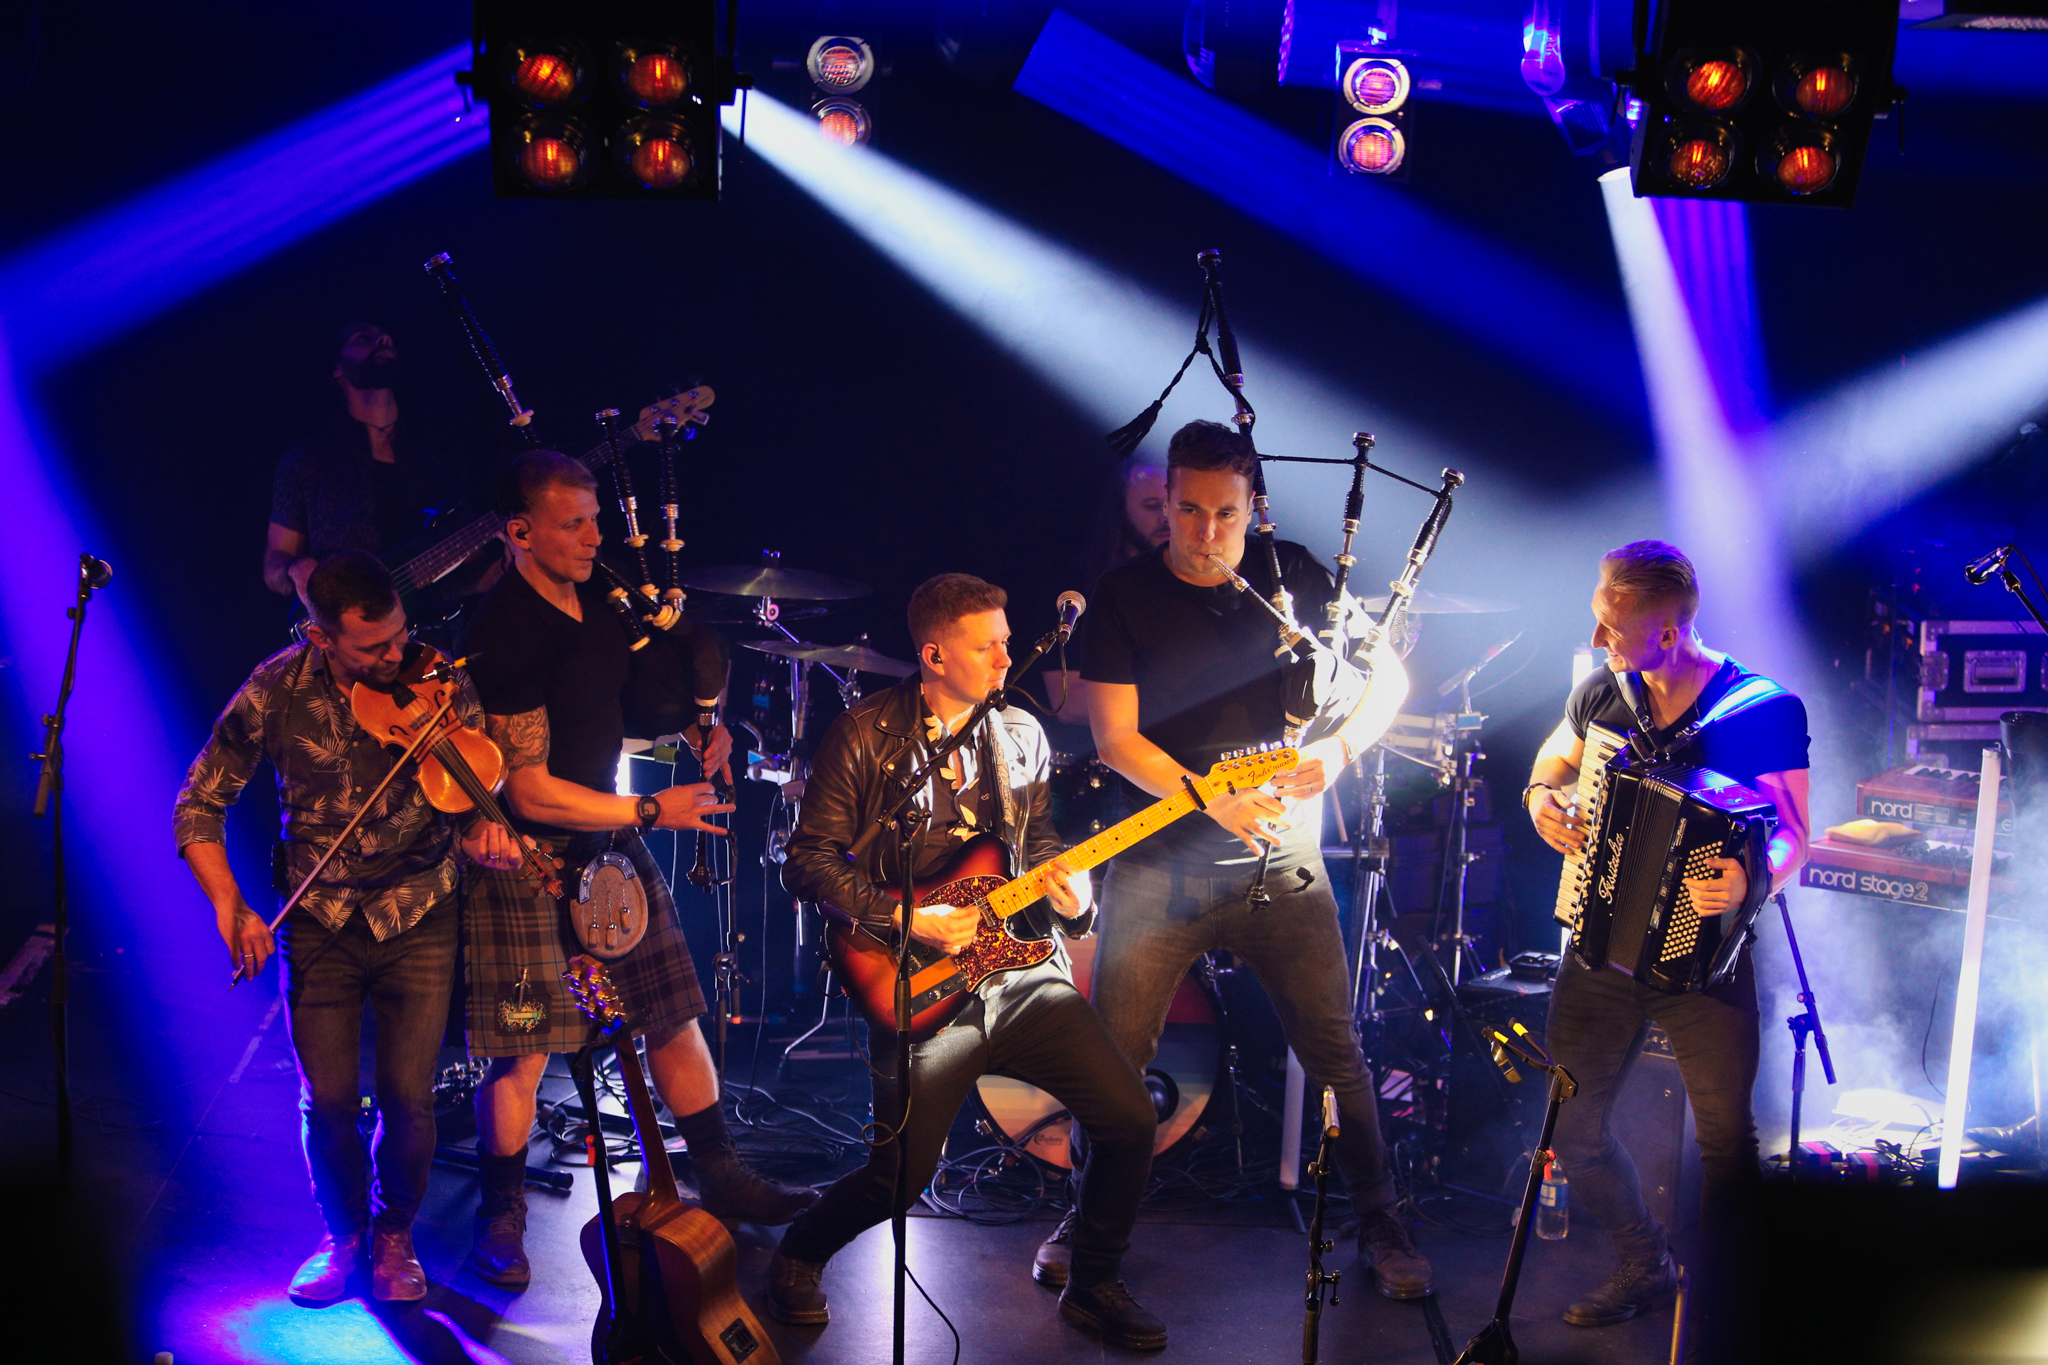 Skerryvore band playing instruments on stage